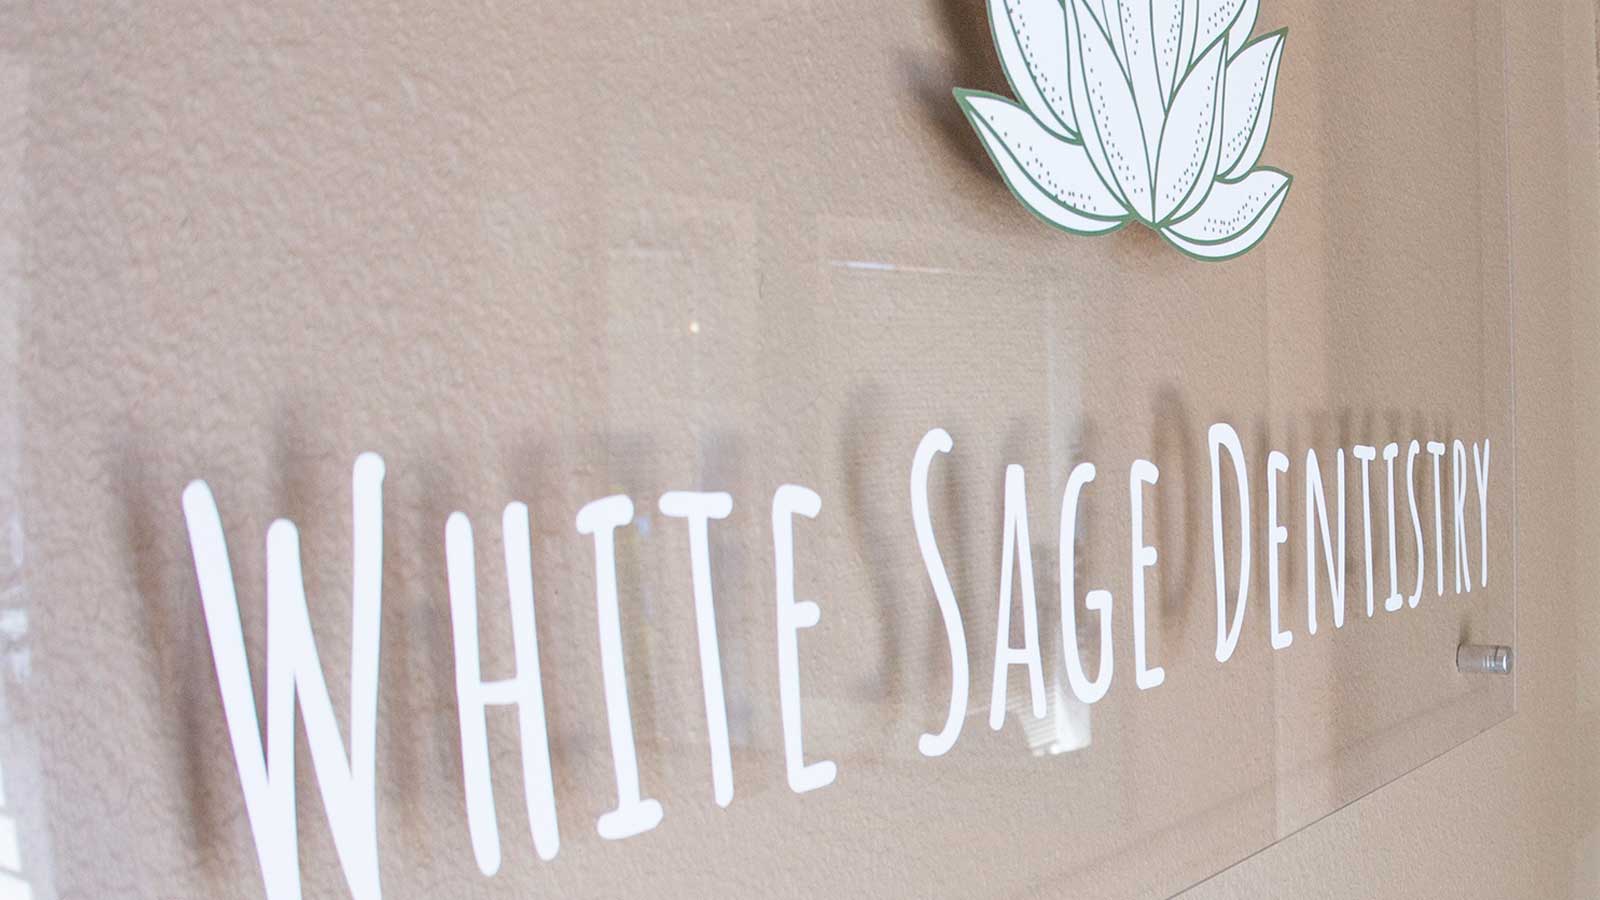 White Sage Dentistry Name with Logo